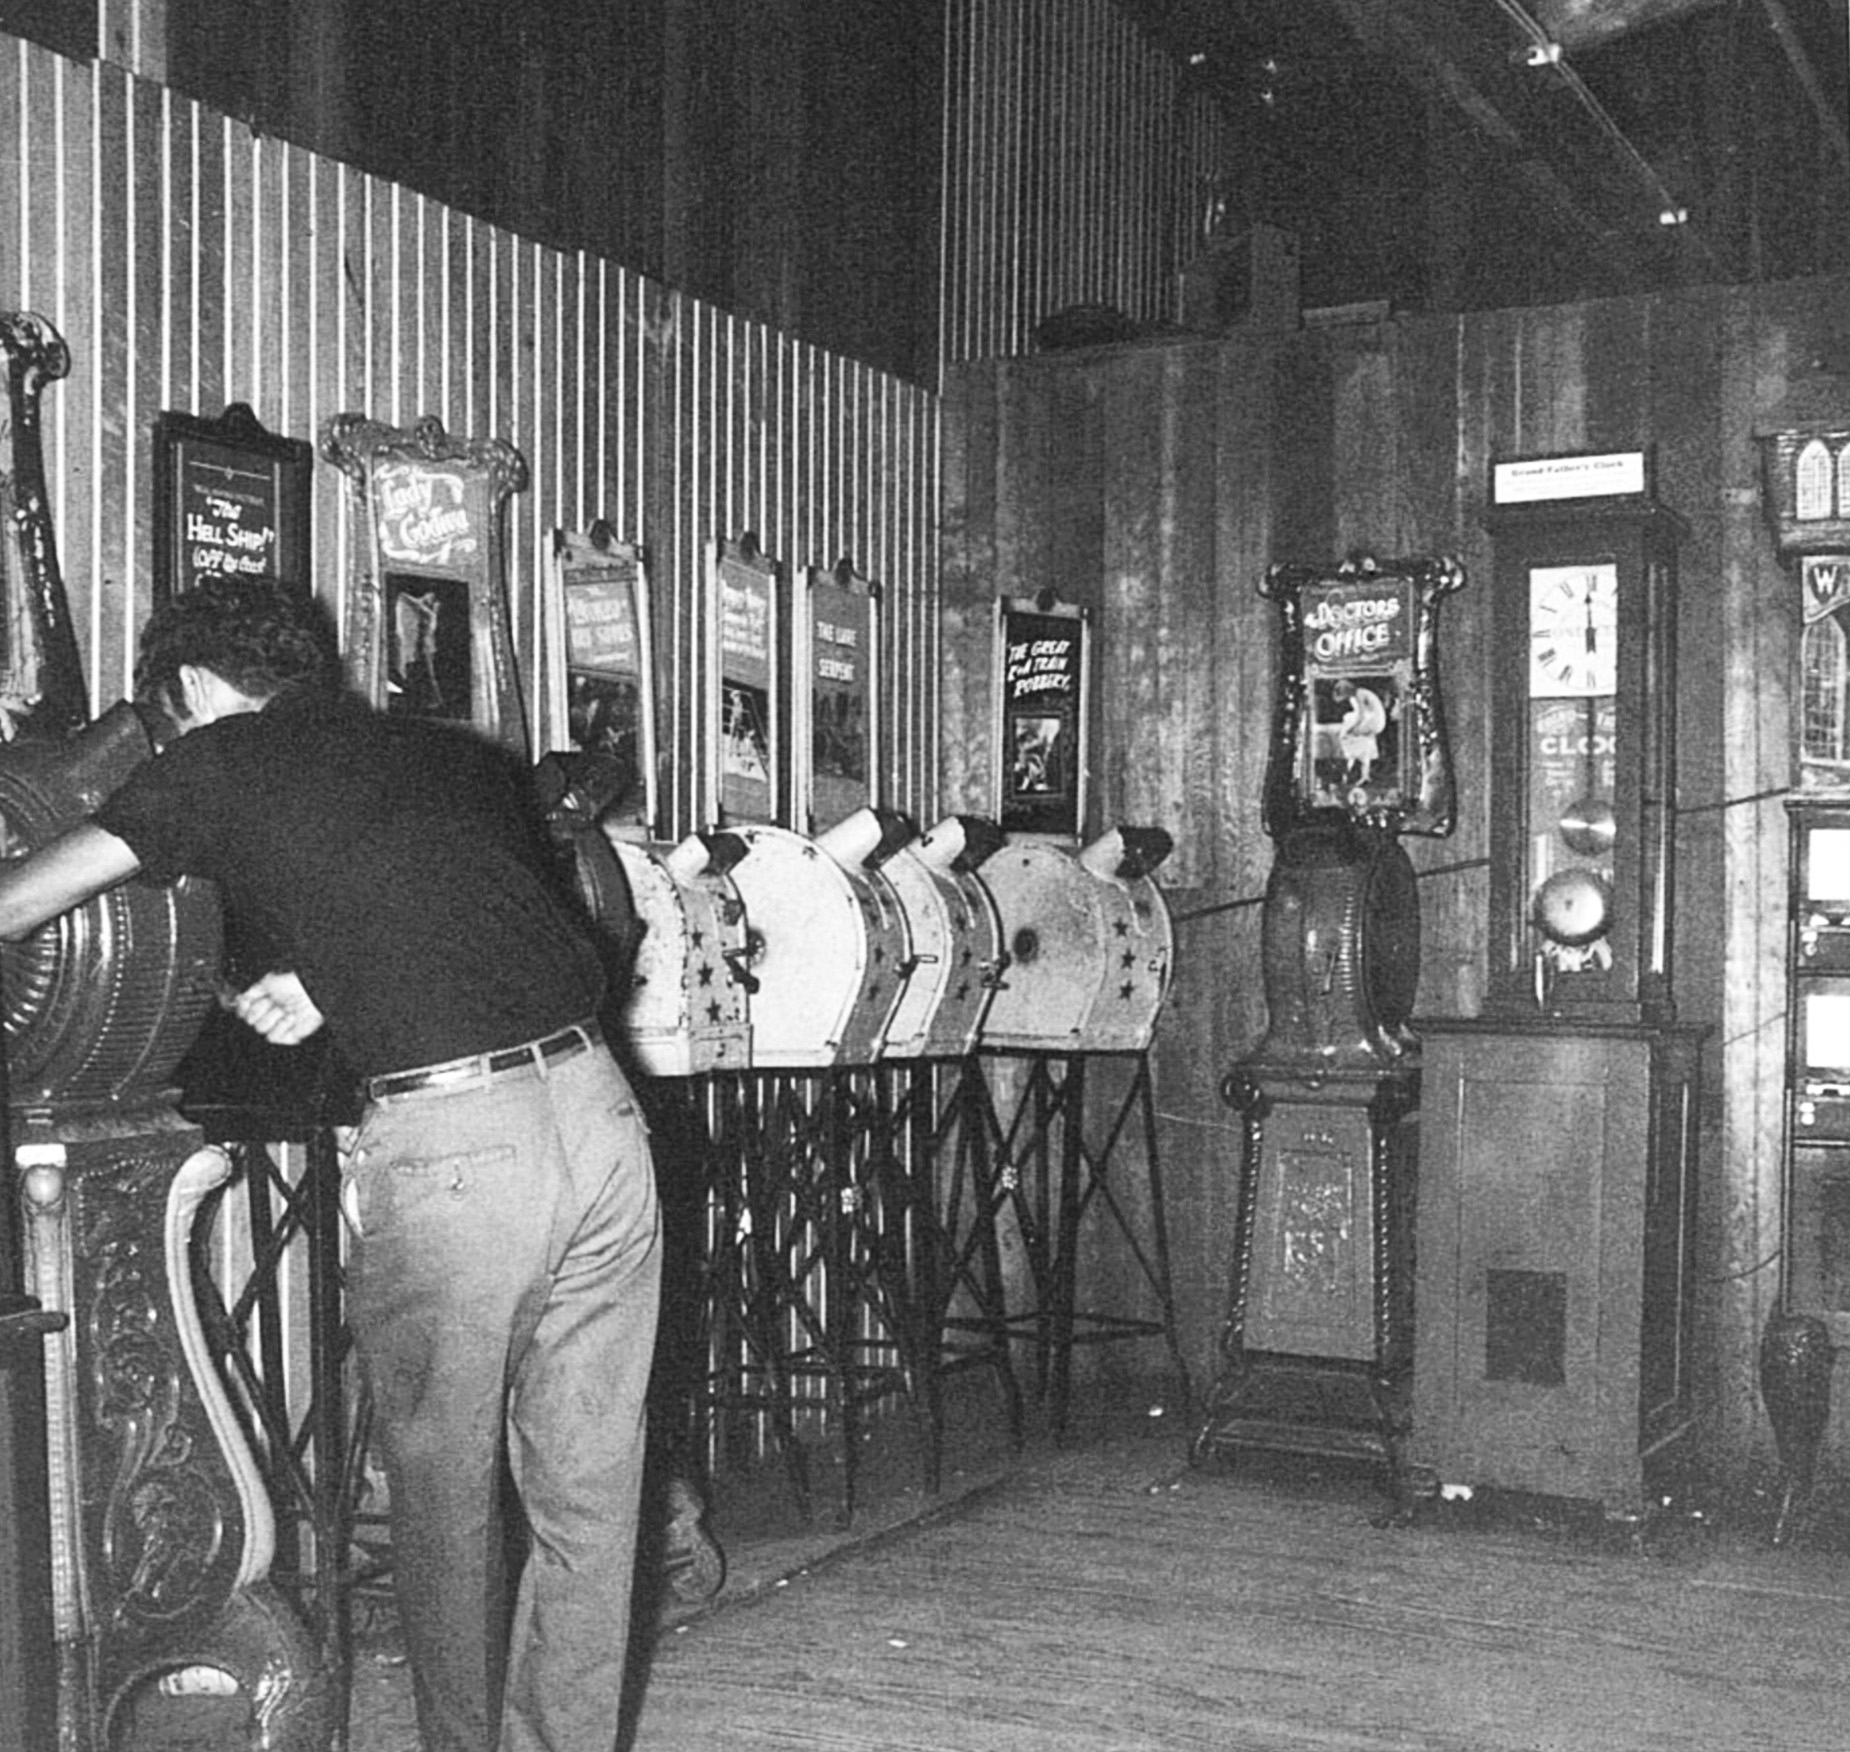 From an arcade in Upper Dauphin County, PA. This picture dates to around the mid to late 1950's even though the machines are much older. Just shows that they were built to last. 

The first 8 machines, beginning on the left and going clockwise, are a variety of Mutoscope movie viewers. A couple cast iron "Clamshell" models, (c.1895), a rare "Indian" model (c.1895) that the man is using, and a few all tin models. In the right half of the picture is a c. 1925 Gatter Novelty Company "Grandfather Clock Strength Machine". To the far right, and cut off is an Exhibit Supply Card vendor from 1930. These machines are highly sought after by collectors. View full size.